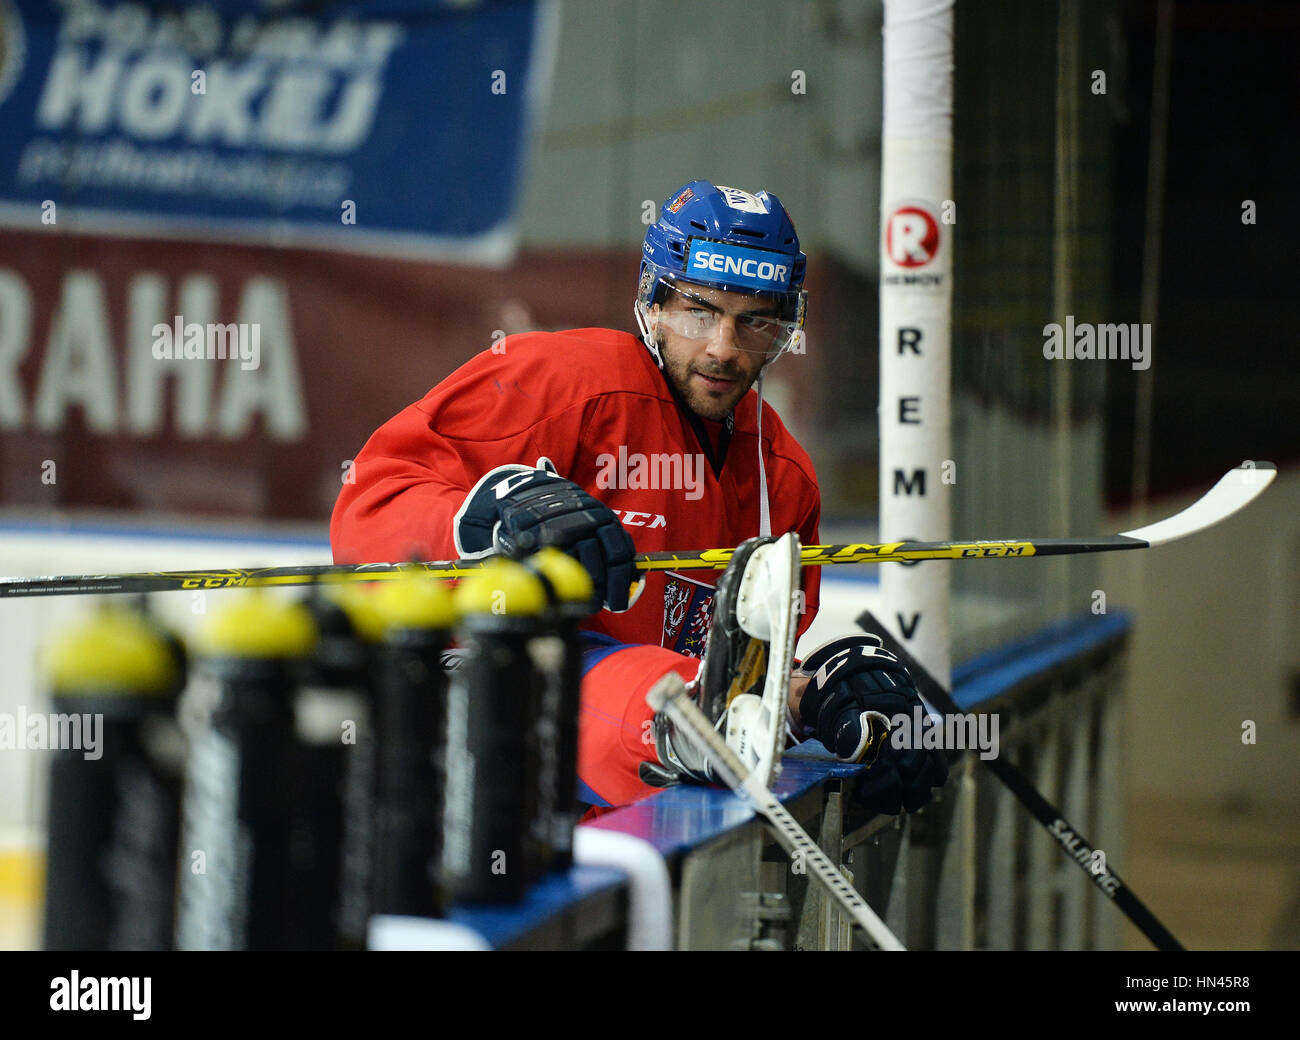 Prague, Czech Republic. 08th Feb, 2017. The Czech national ice-hockey team's player Petr Jelinek in action during the training session prior to the February Sweden Games in Gothenburg in Prague, Czech Republic, February 8, 2017. Sweden Games, the third part of the European Hockey Tour (EHT) series, will take place on February 9-12. Credit: Katerina Sulova/CTK Photo/Alamy Live News Stock Photo